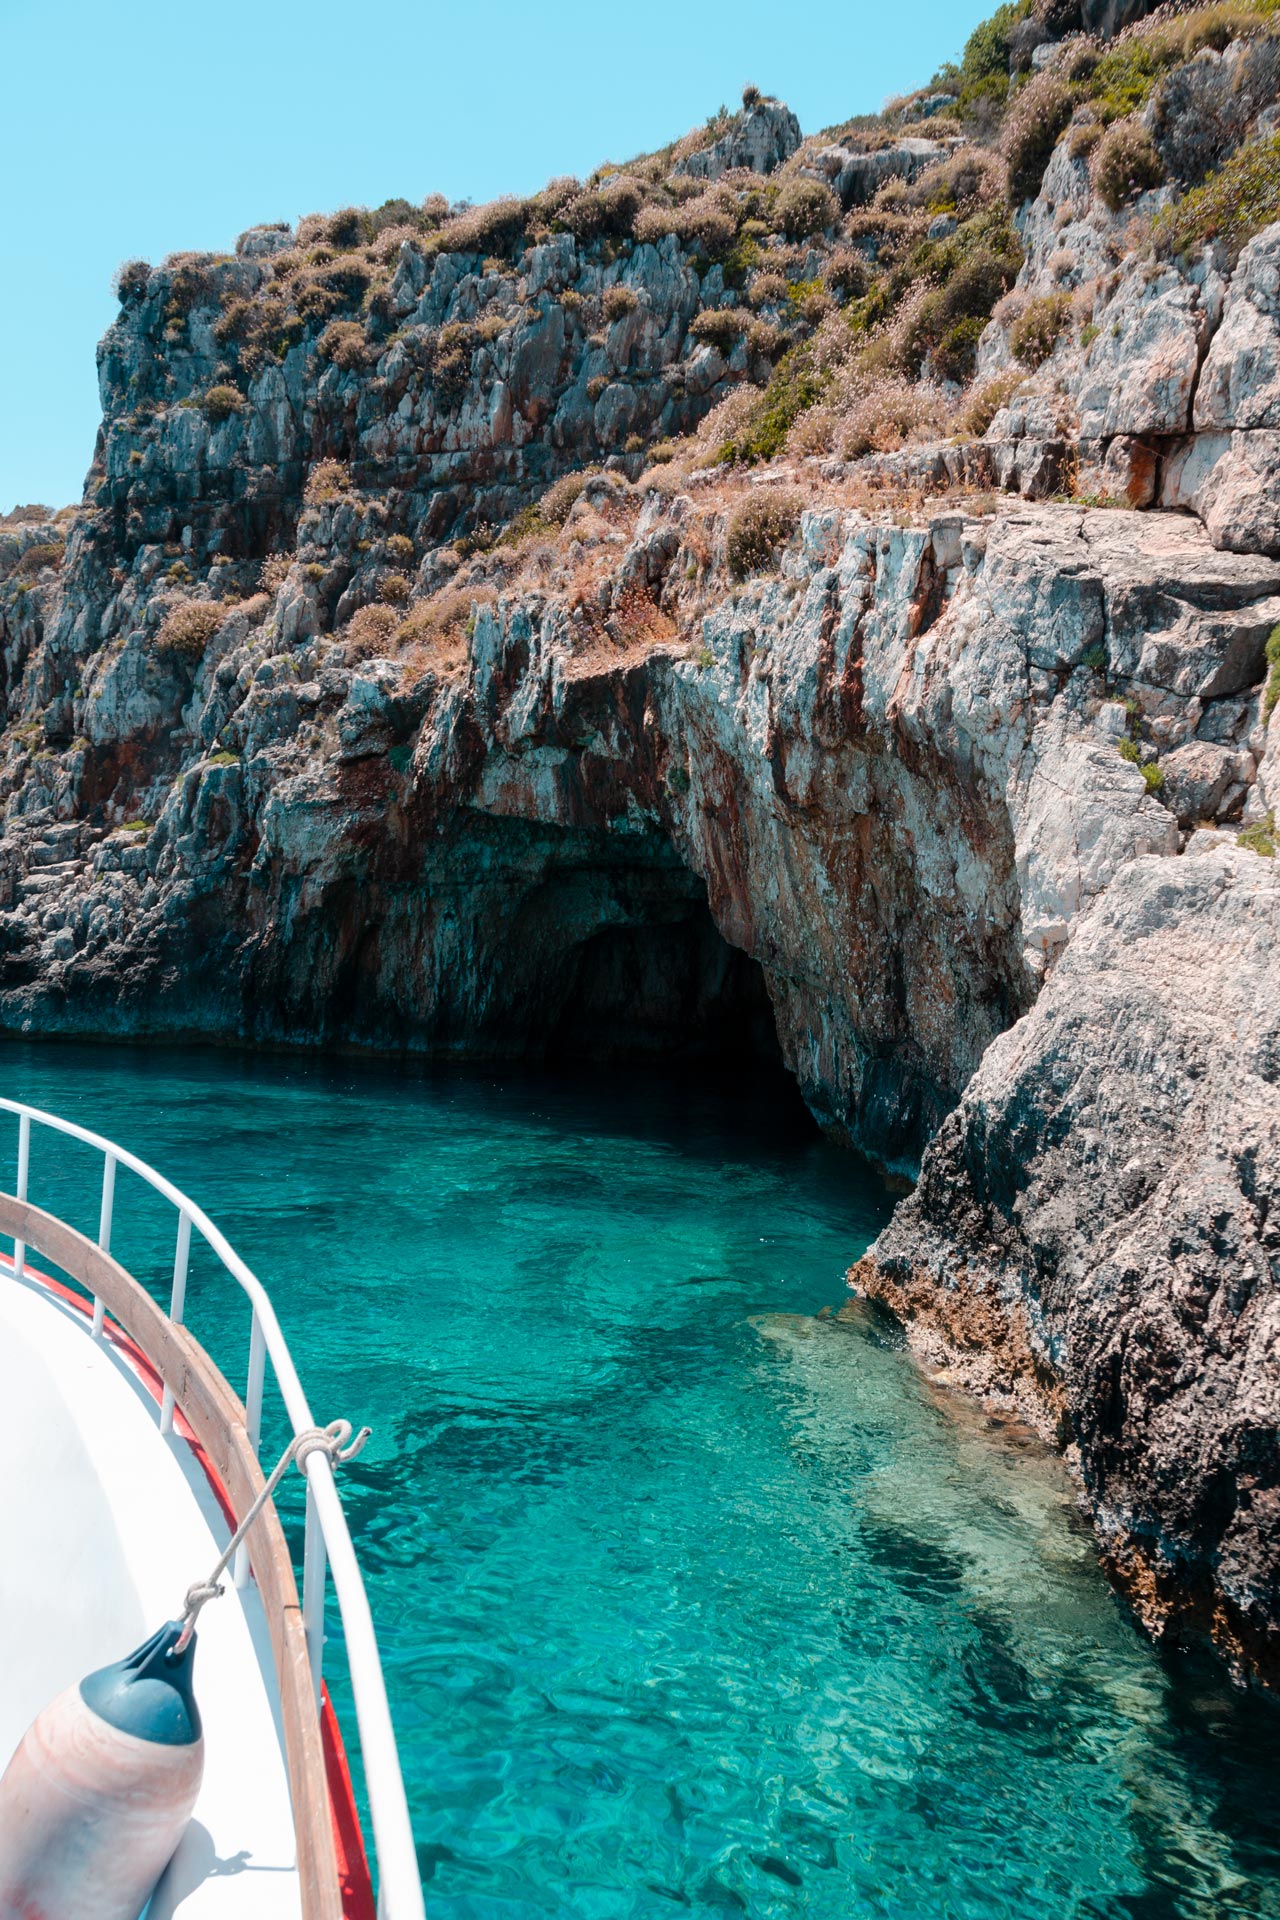 Most boat trips start from Agios Nikolaos and follow the coastline north, where the Blue Caves are located